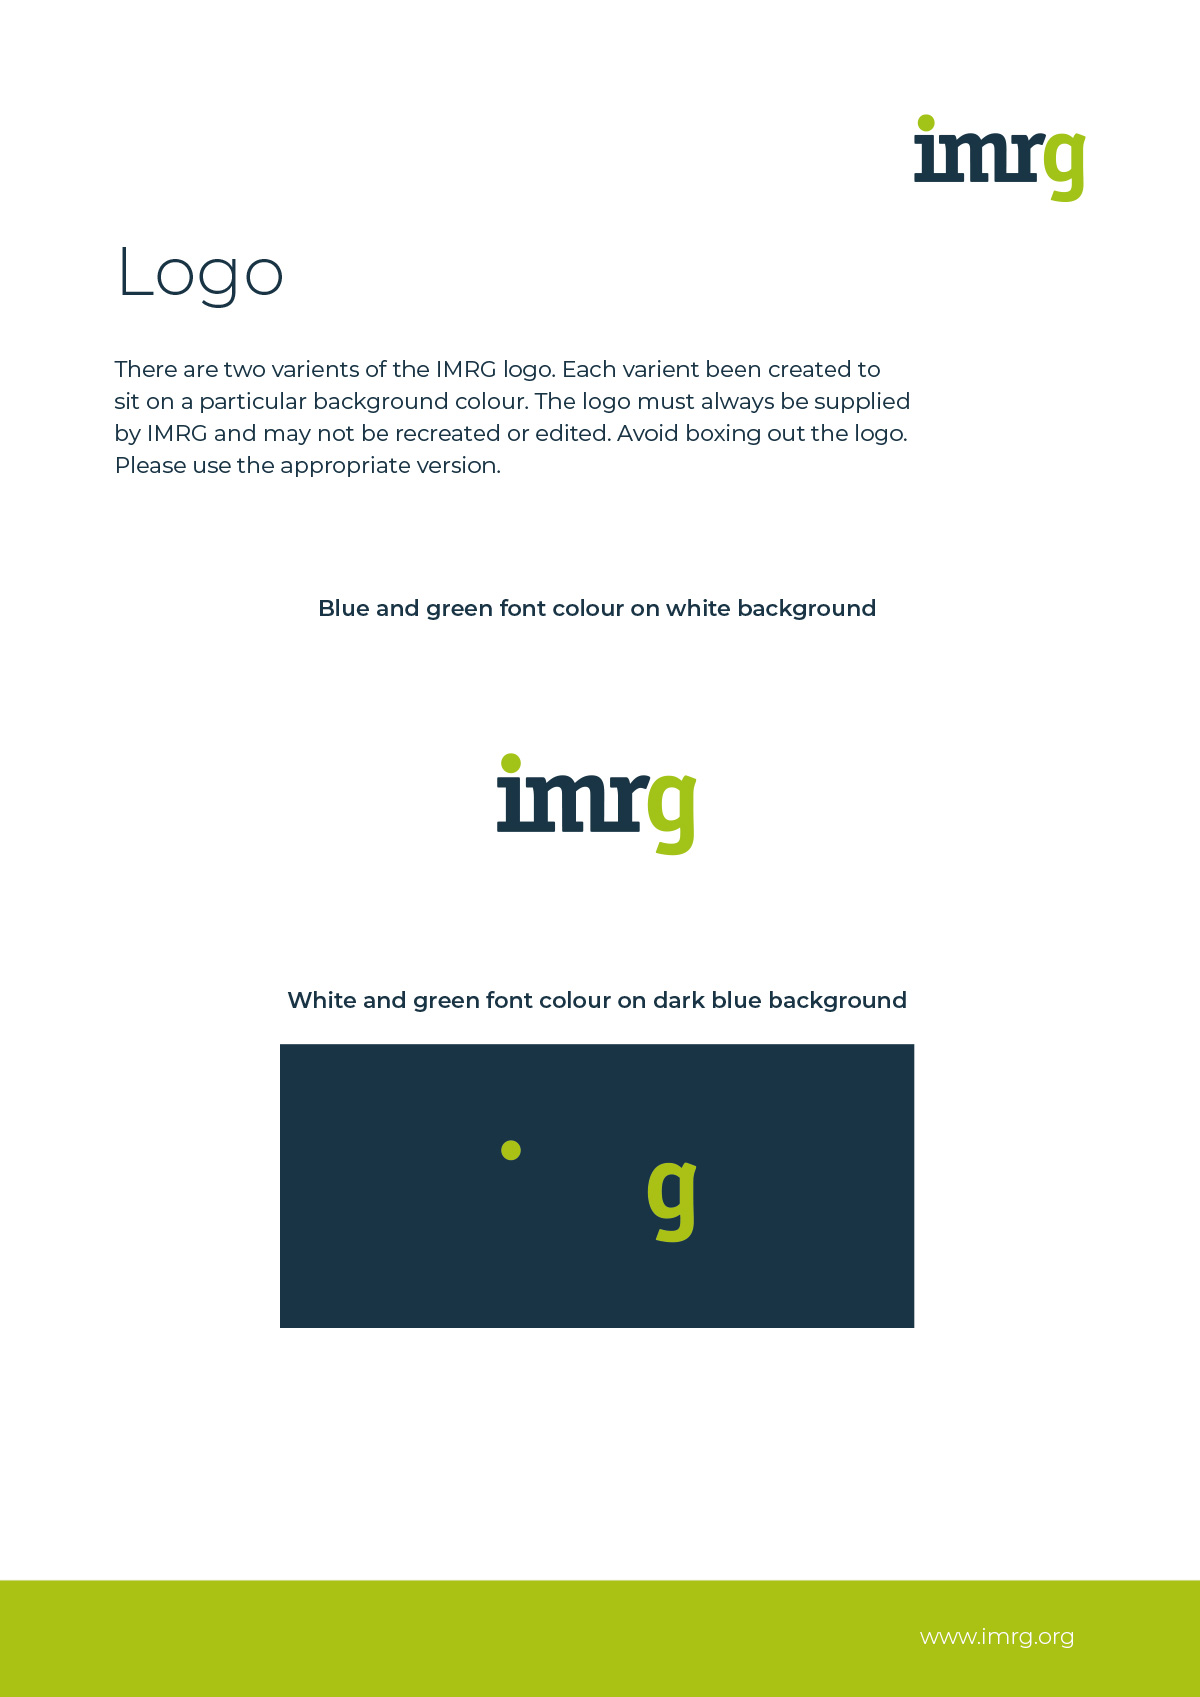 IMRG Corporate identity before redesign 2